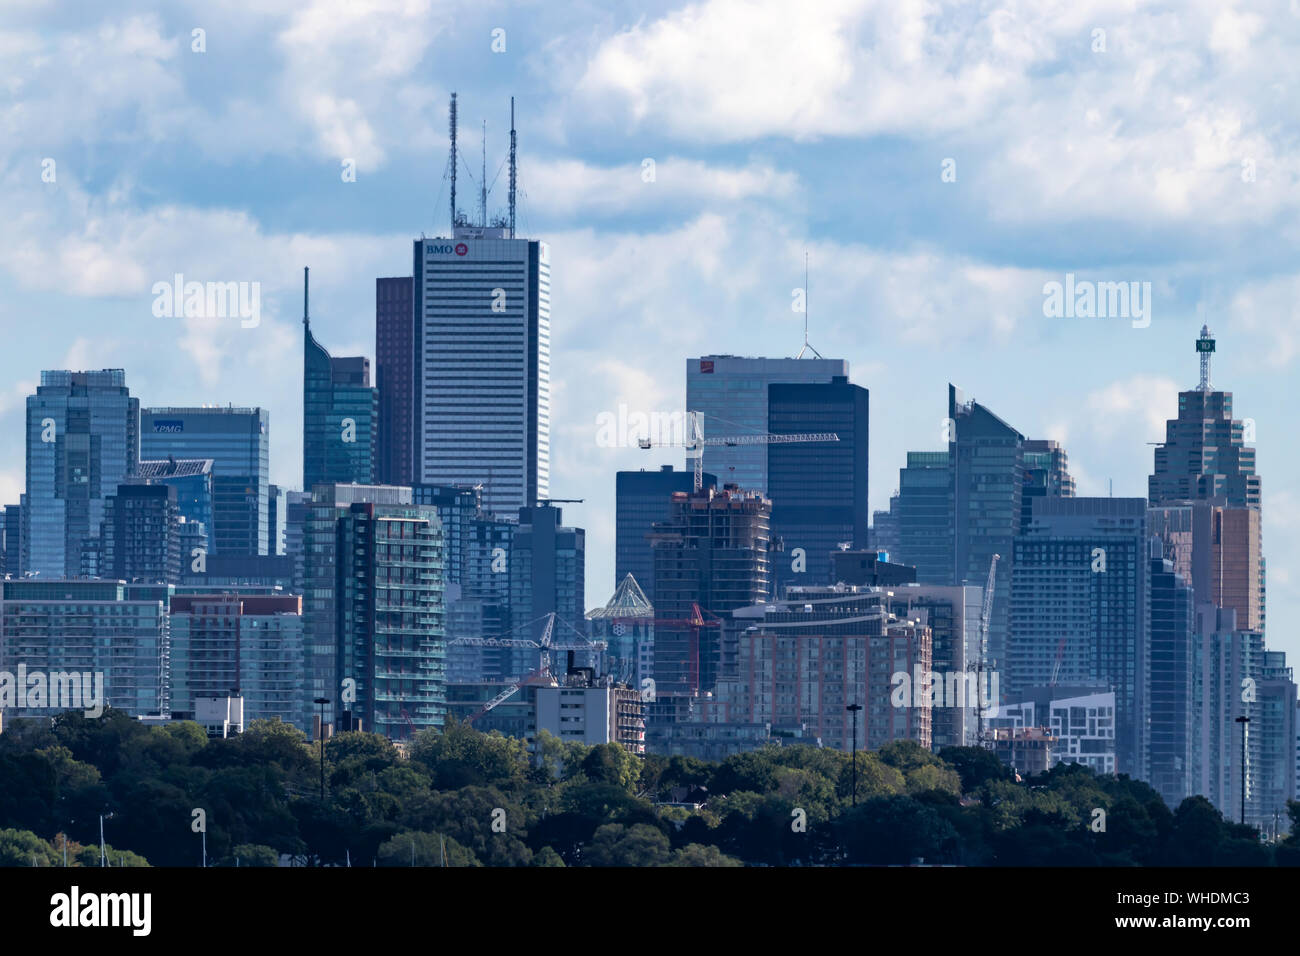 The Toronto Financial District seen from a distance. Stock Photo